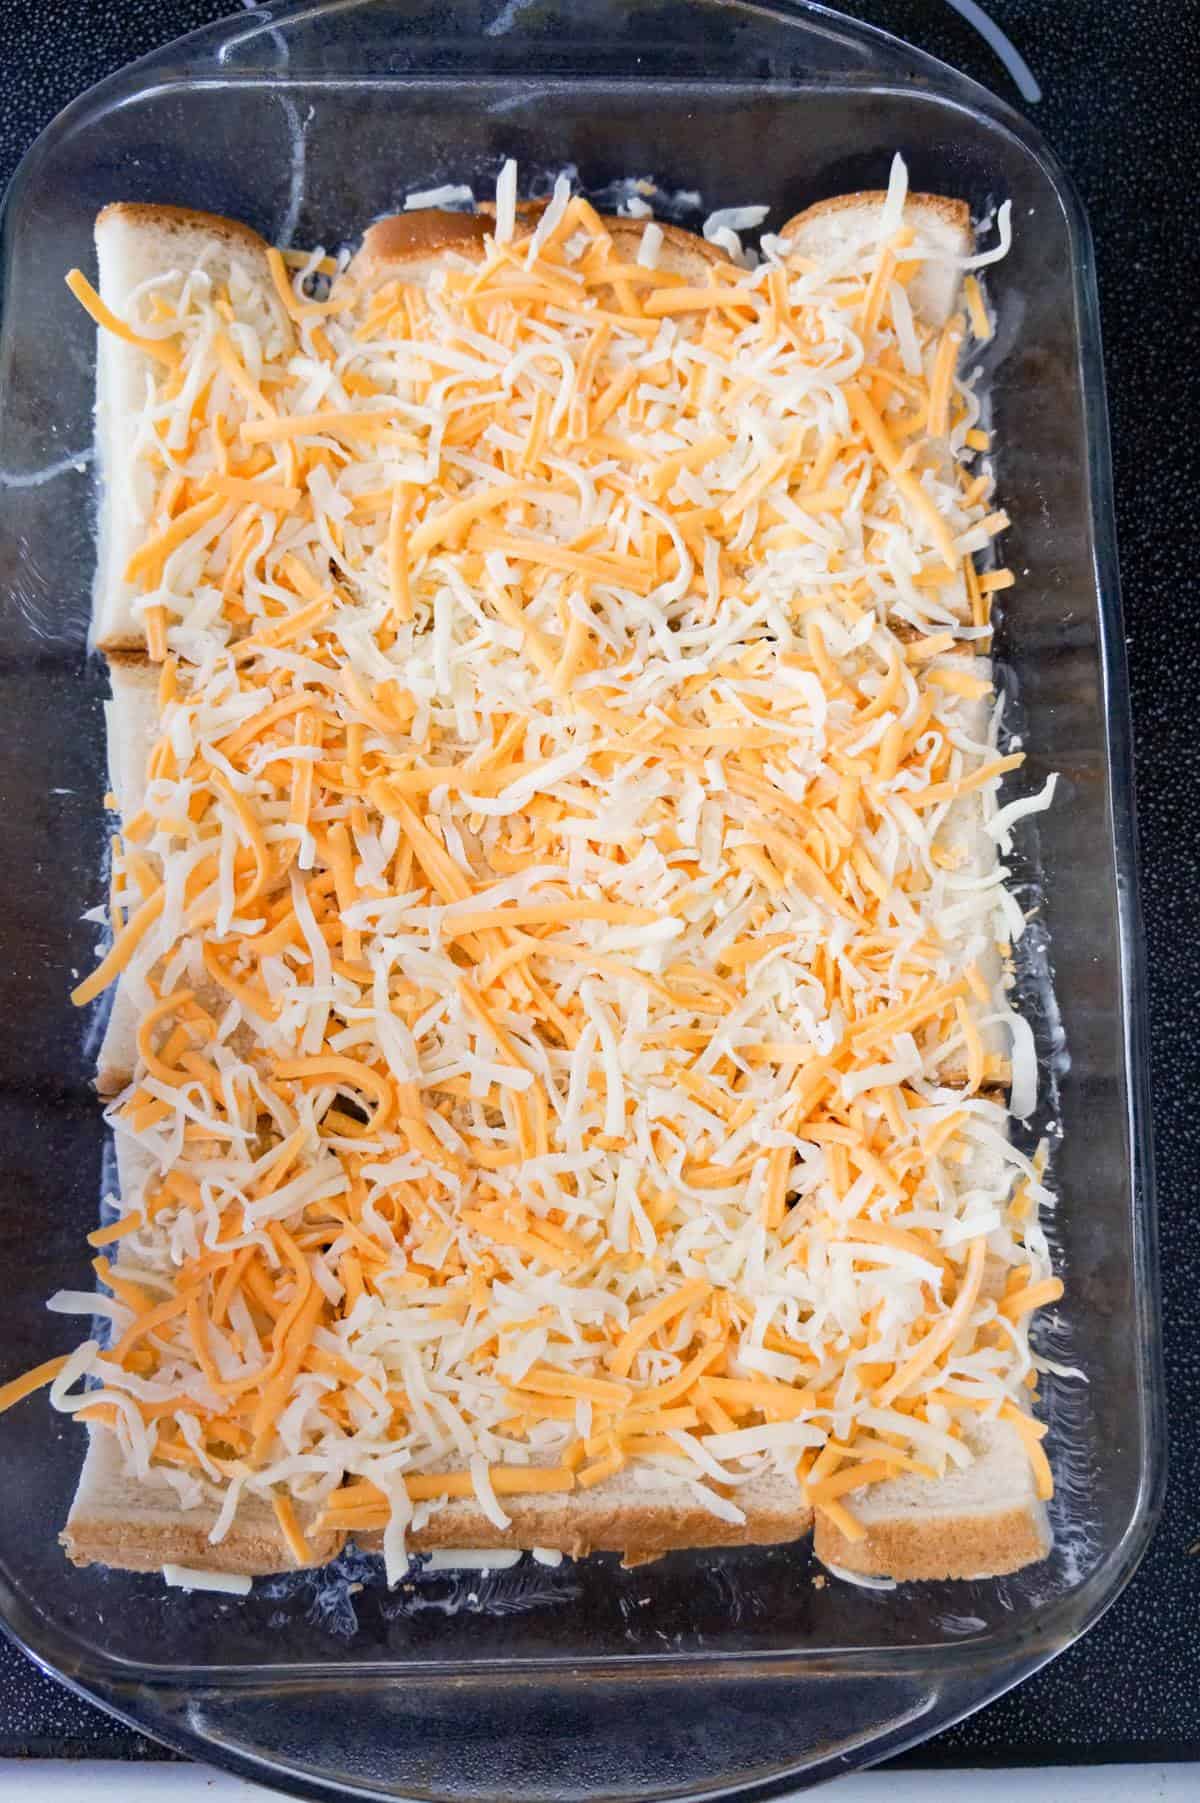 shredded cheese on top of bread in a baking dish